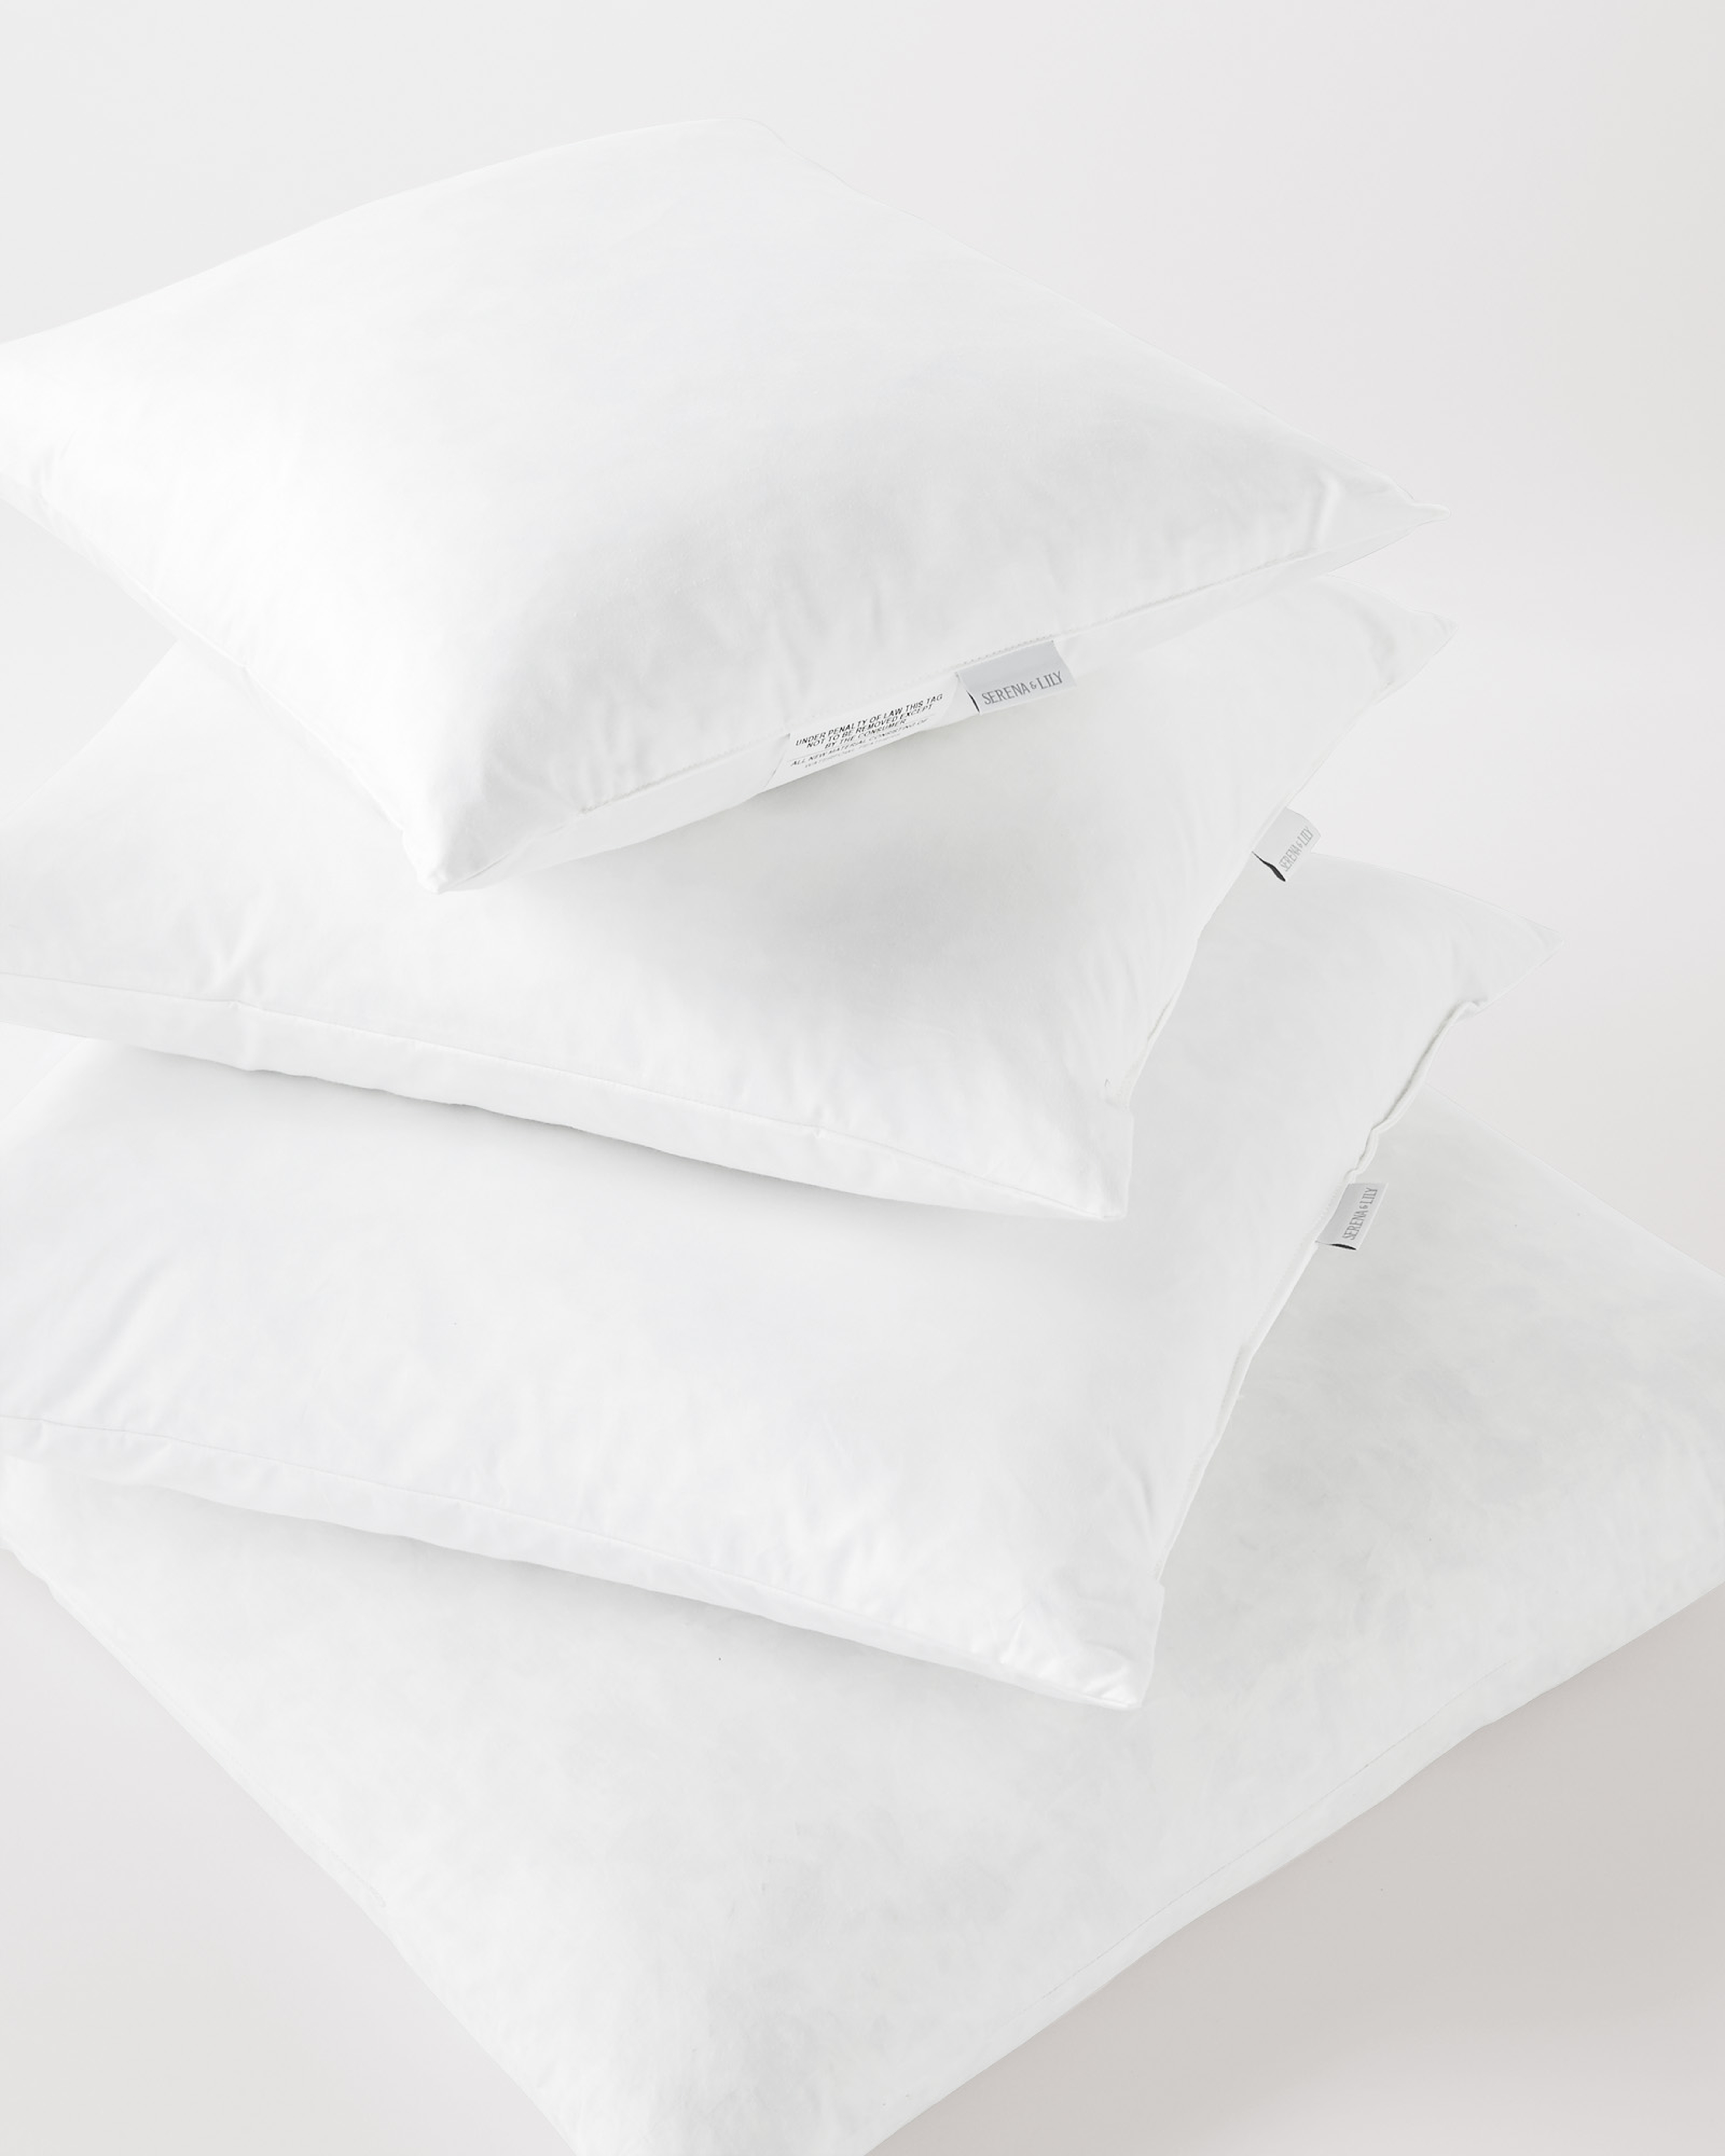 Pillow Insert, white - 12x18 - Feather down - Serena and Lily